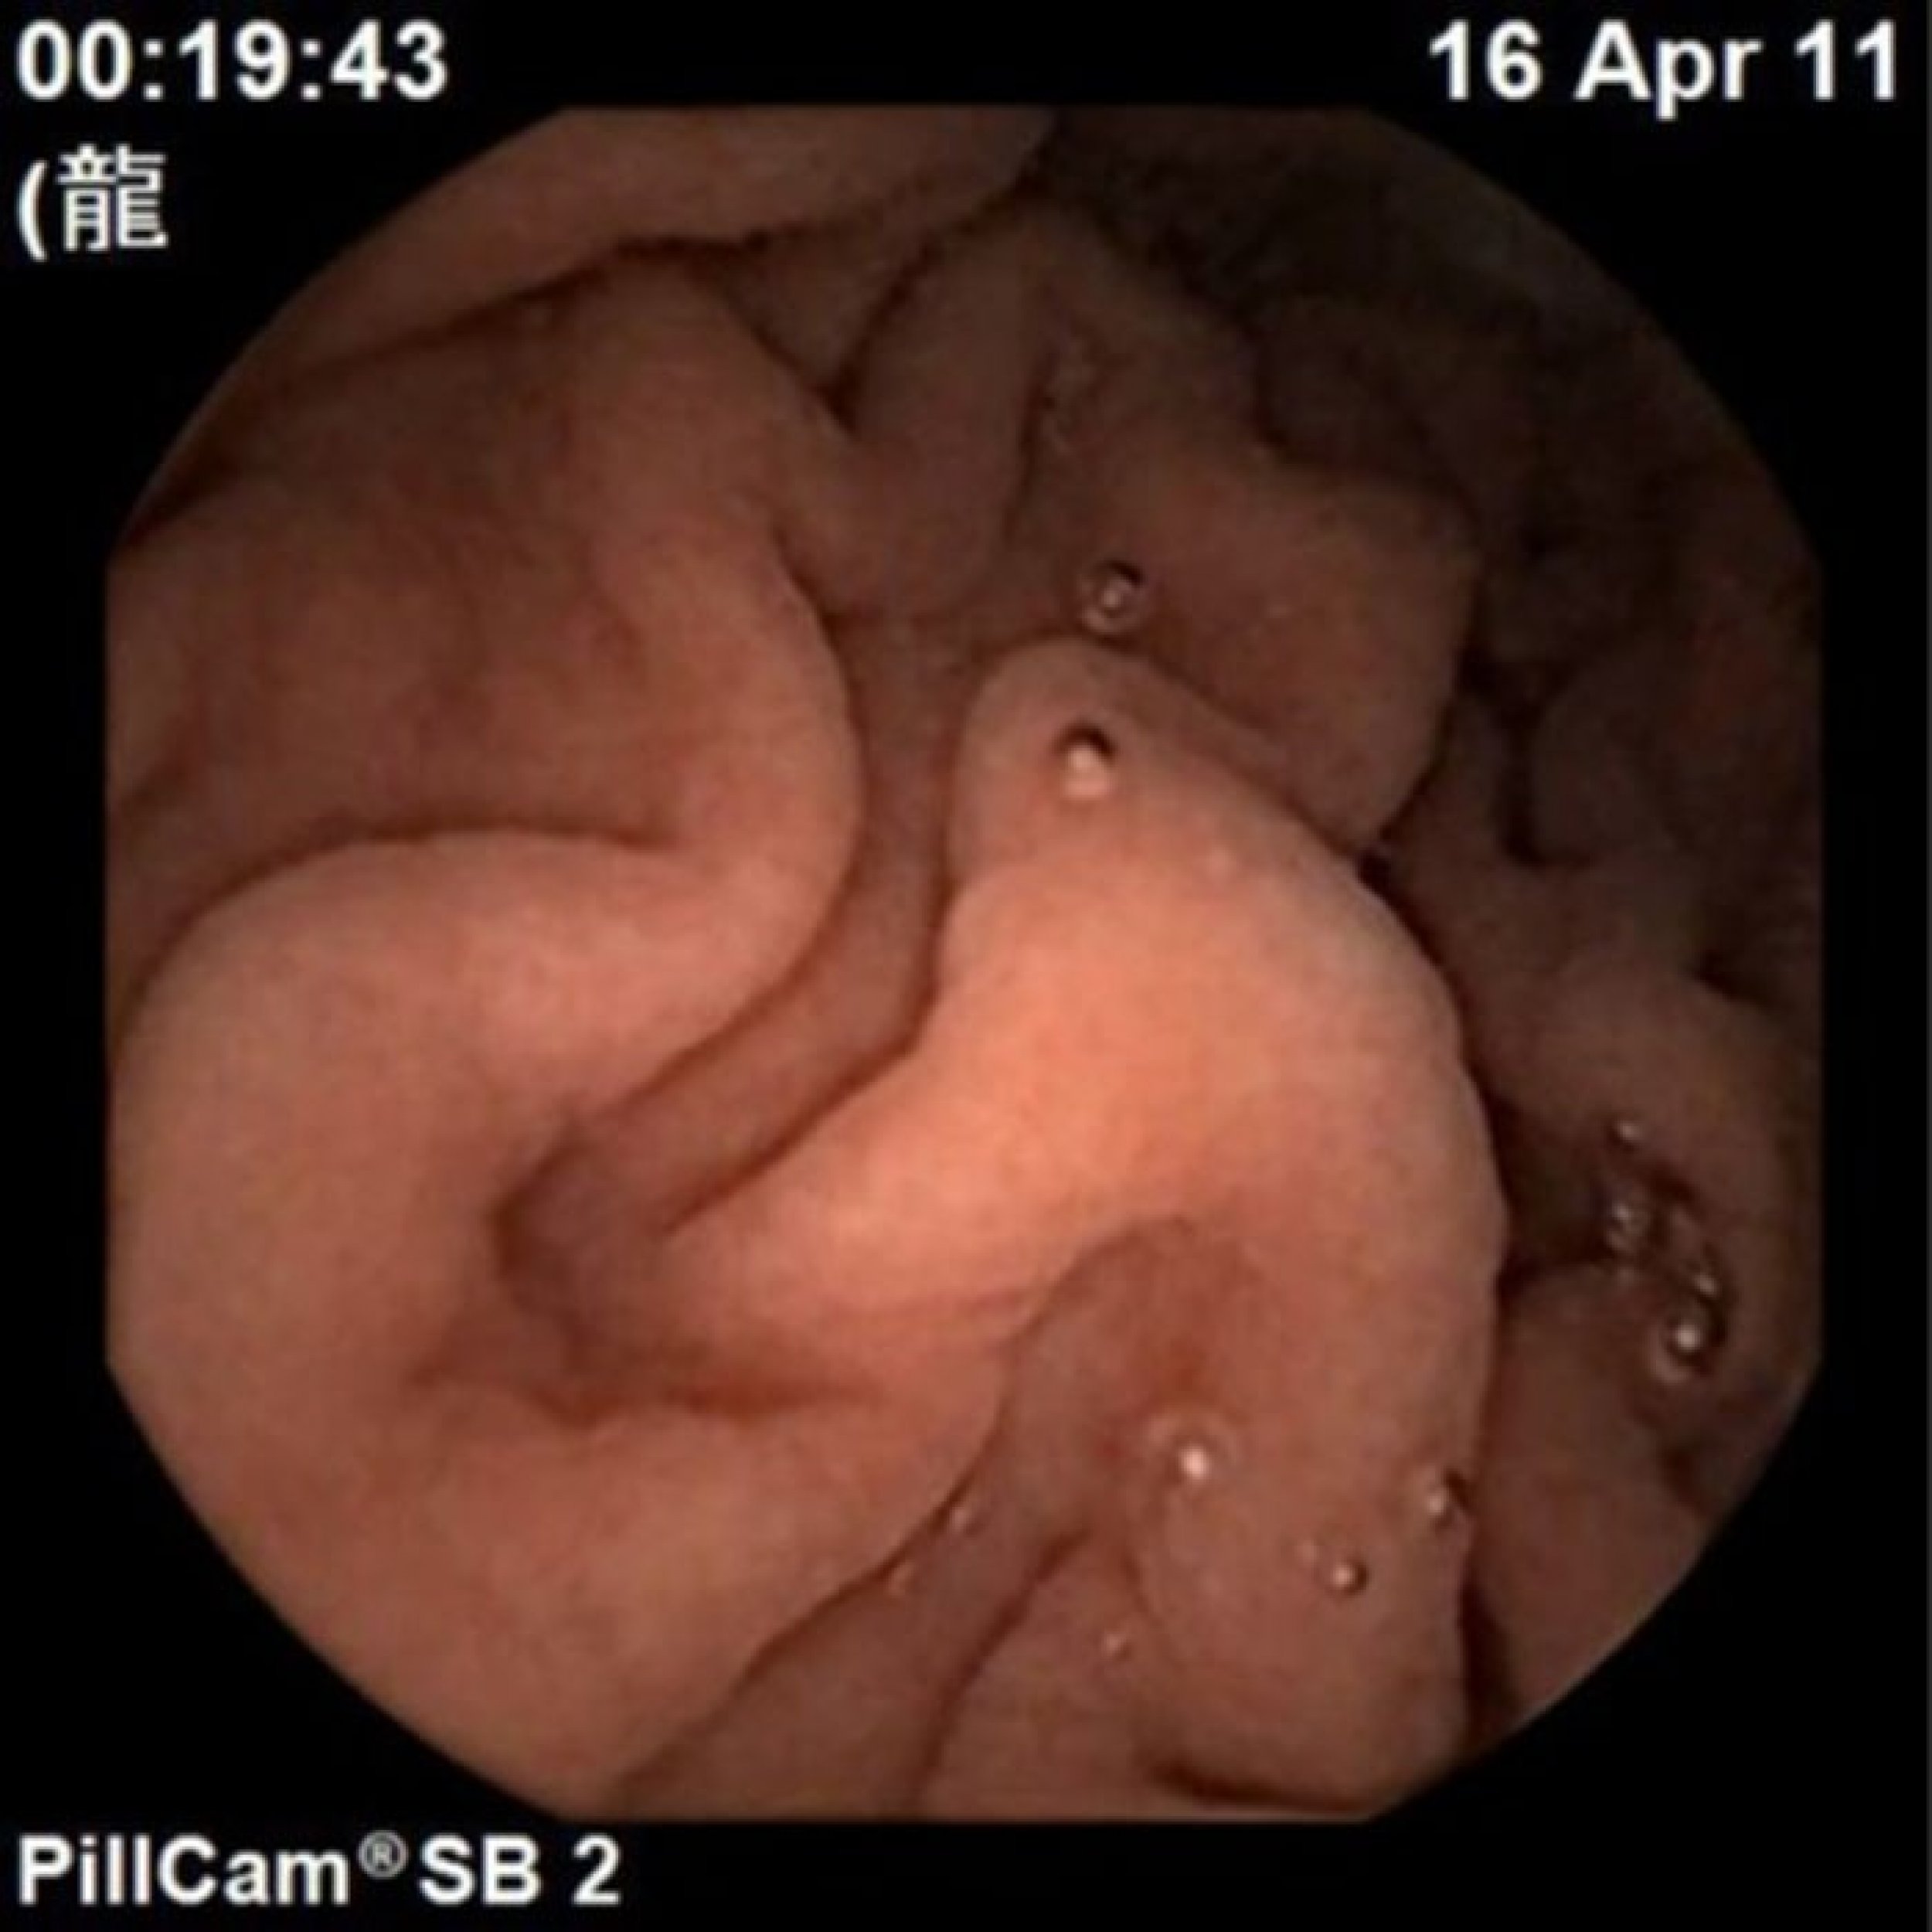 An image taken by pill-size remote-controlled endoscope Mermaid inside the human digestive tract